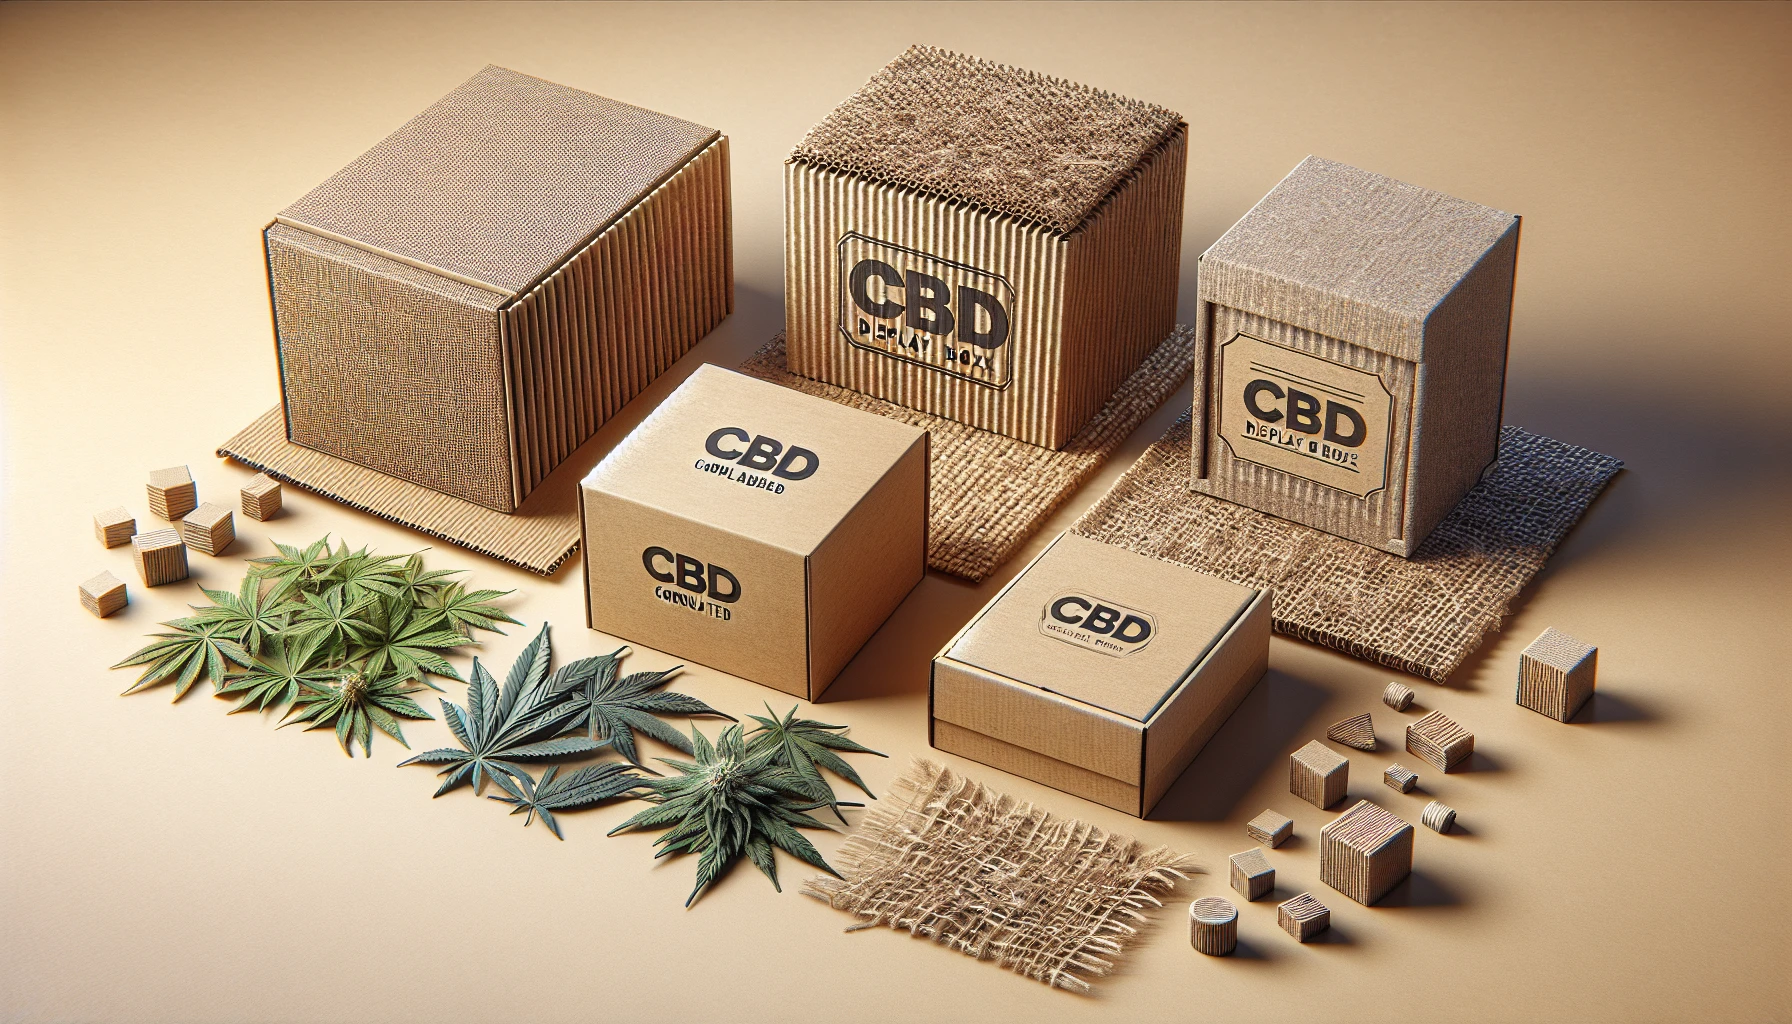 Variety of material options for CBD display boxes